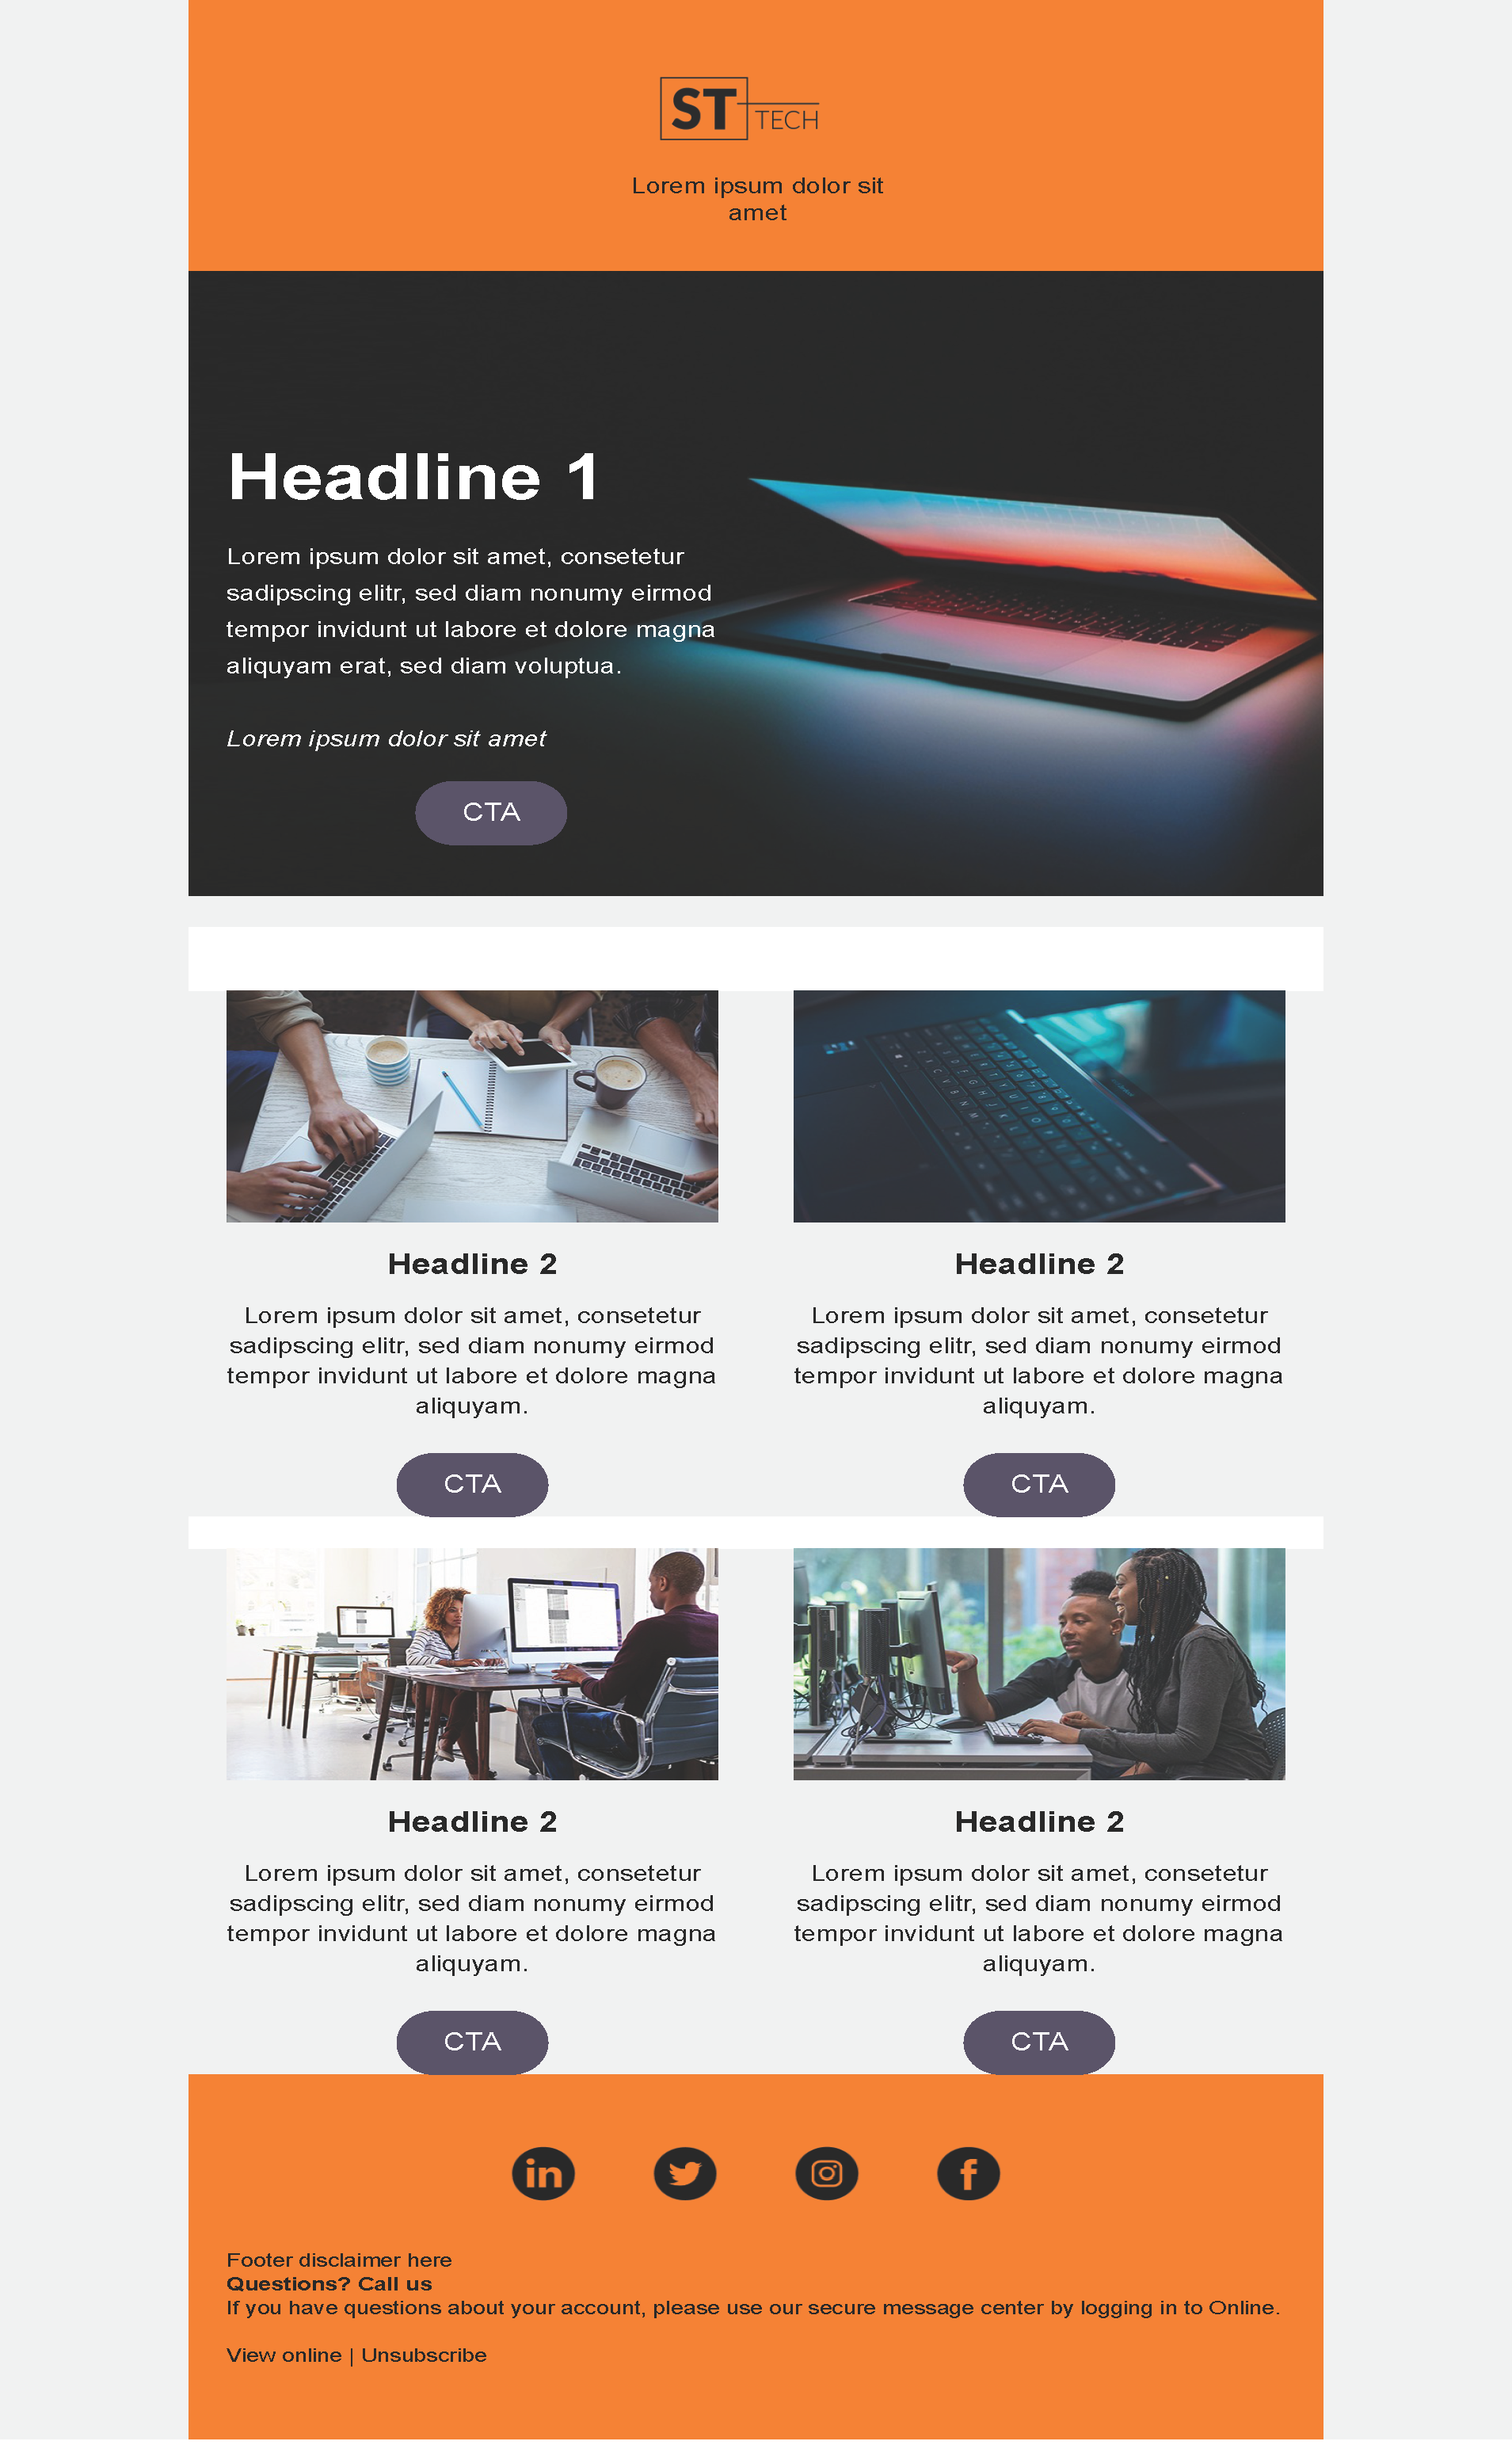 Product Update Templates 2 for a Technology company